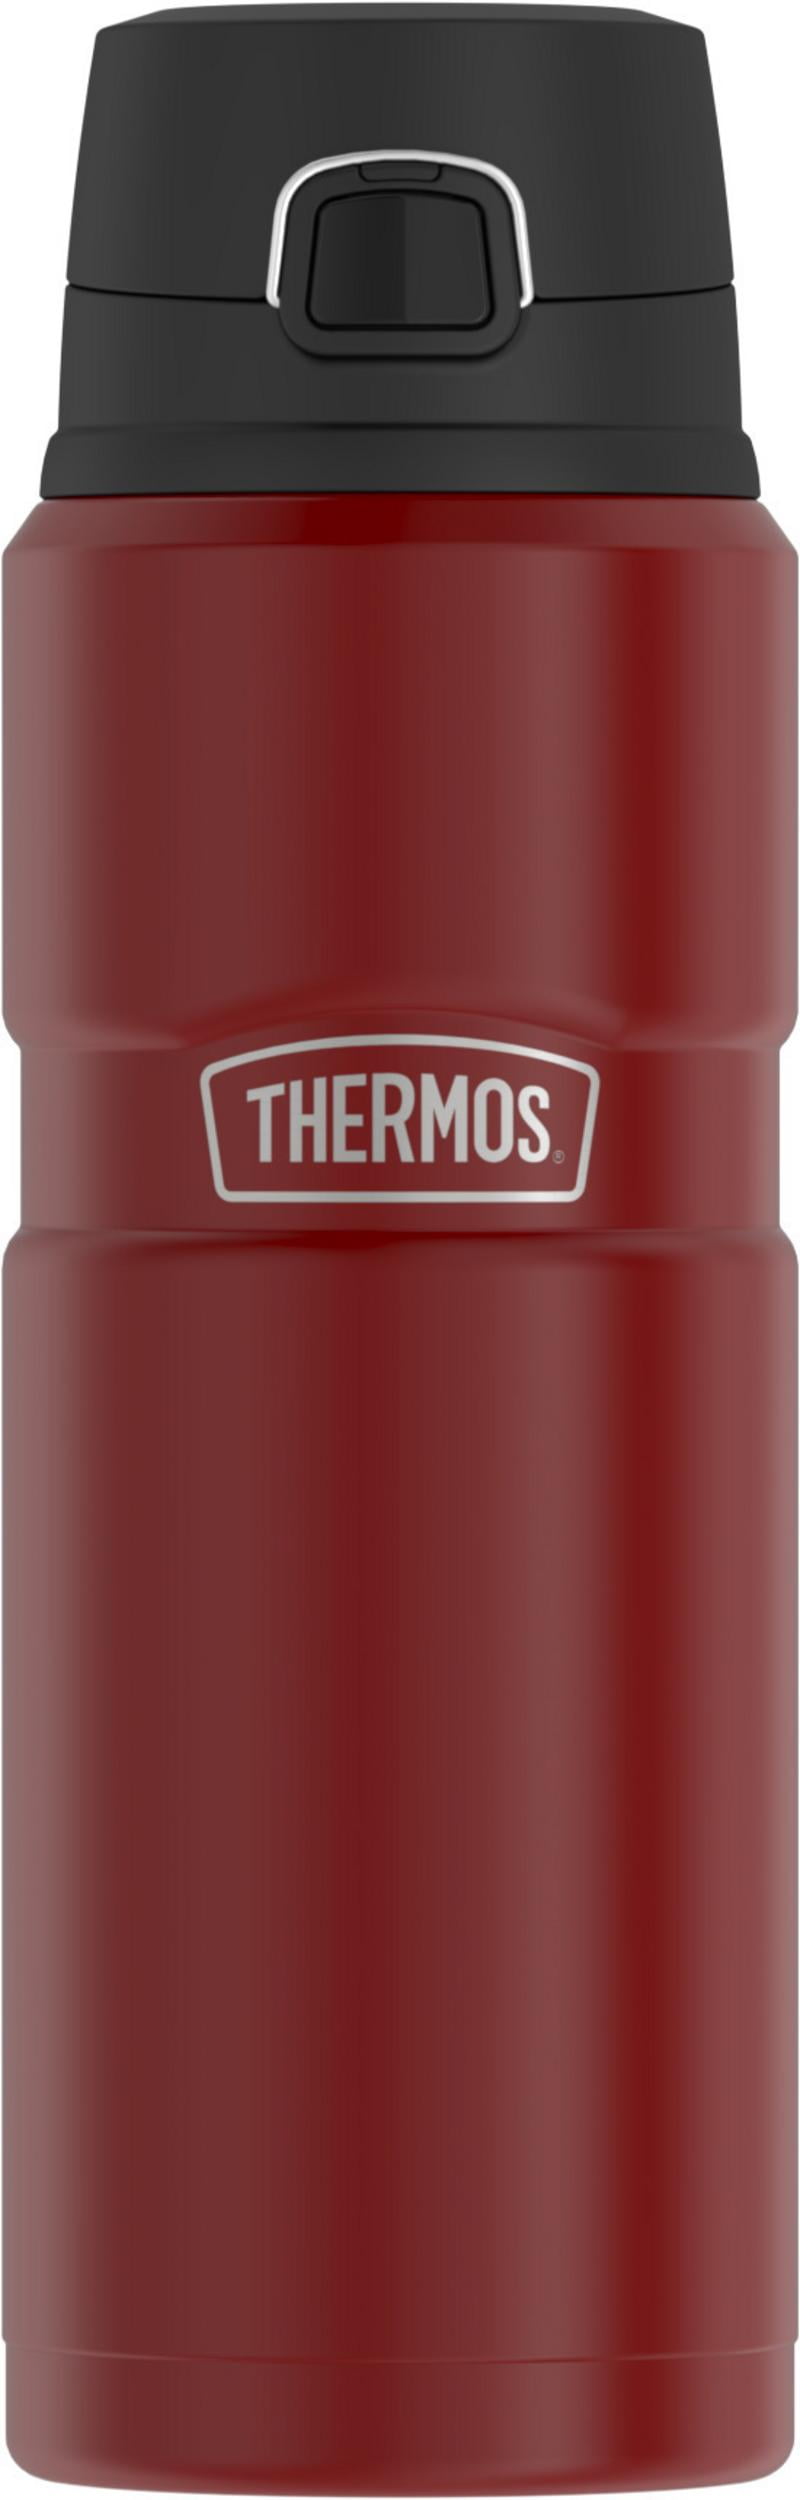 Thermos Stanley Original Mate System Classic 1.2 L with Bombilla Spoon Green